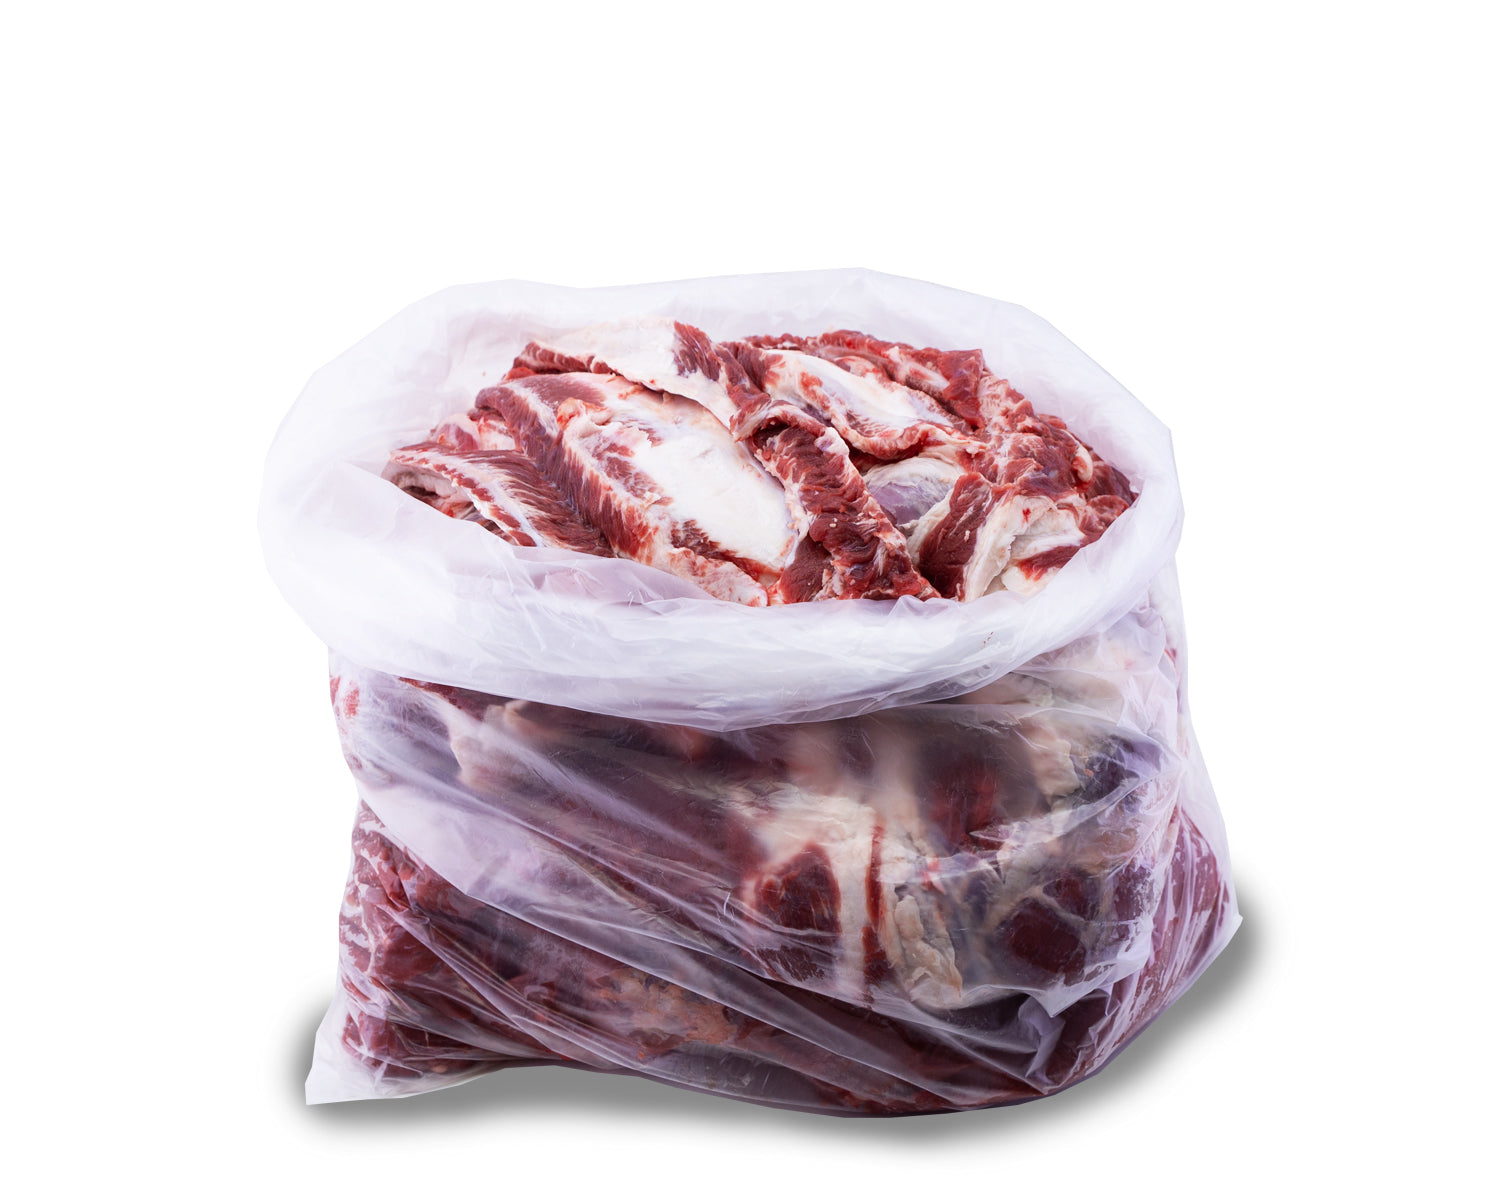 Butcher Bags 400x600mm 50microns Clear Plastic 100pack